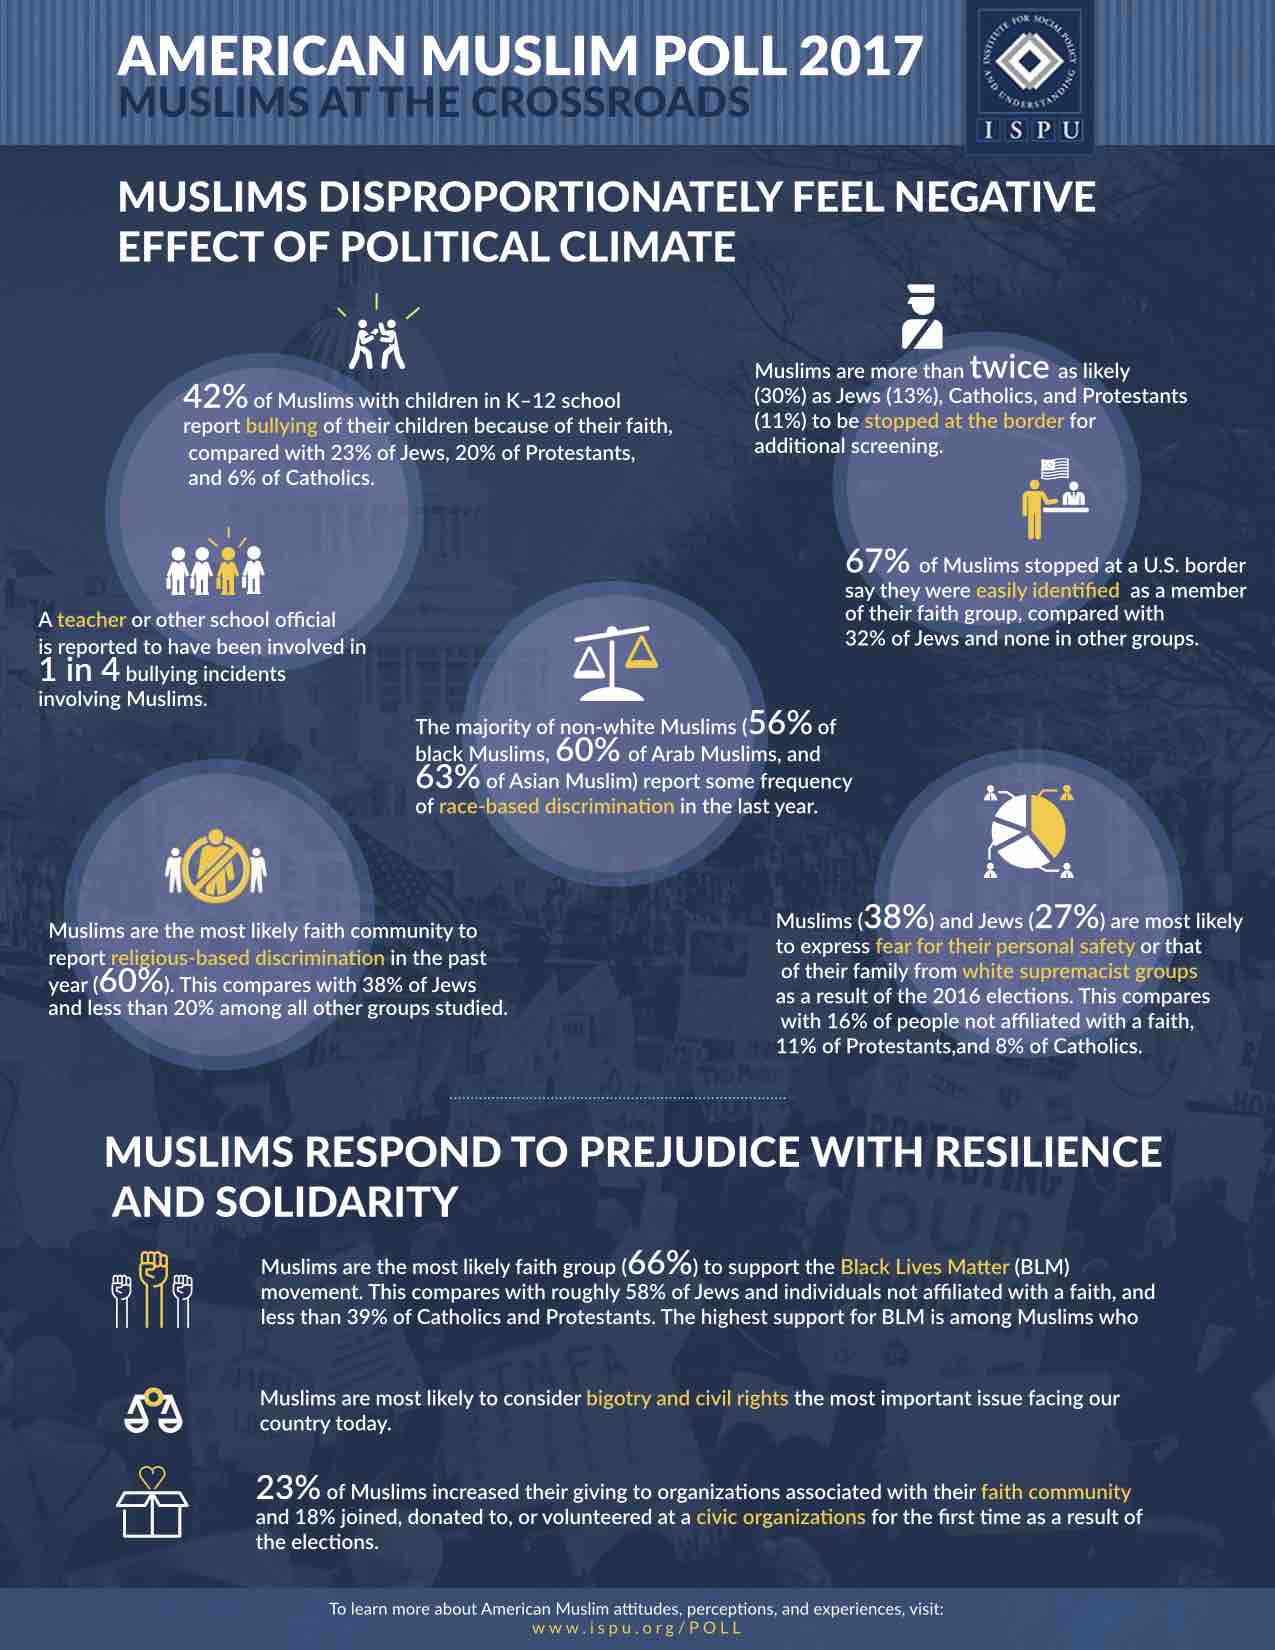 Infographic showing Muslims Disproportionately Feel Negative Effect of Political Climate & Respond to Prejudice with Resilience and Solidarity